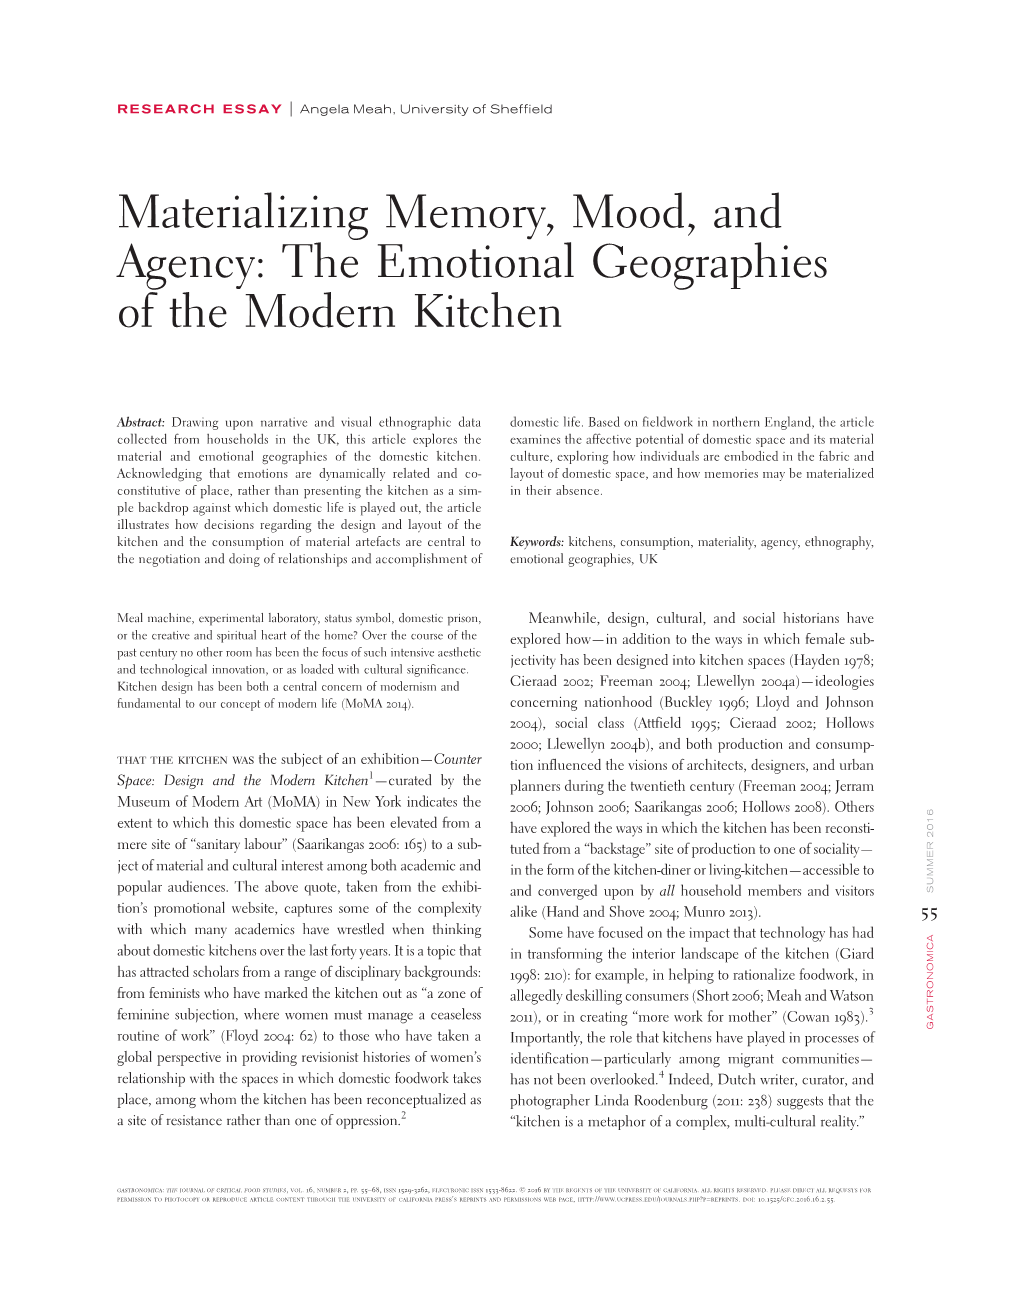 The Emotional Geographies of the Modern Kitchen